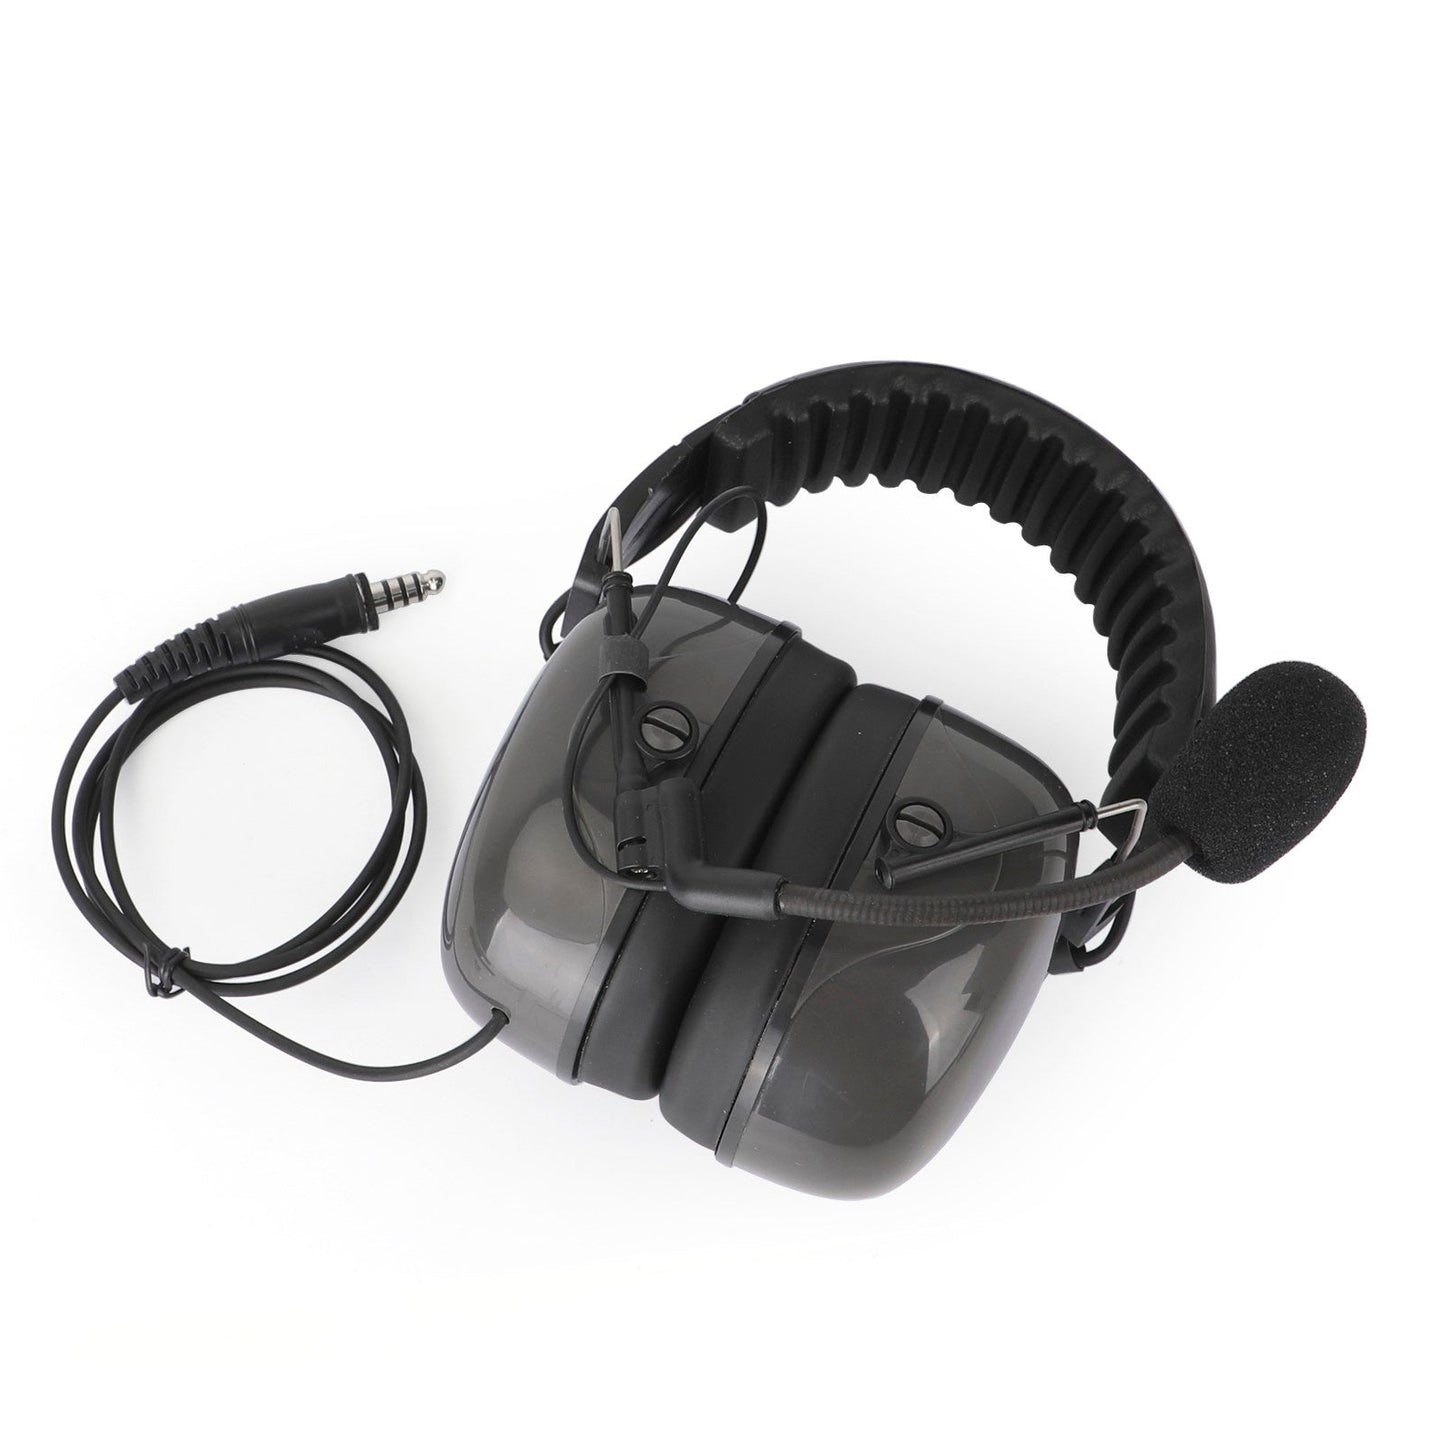 7.1-C5 Adjustable Noise Cancelling Headset For XPR3300/3500 XIRP6600/P6620 E8600